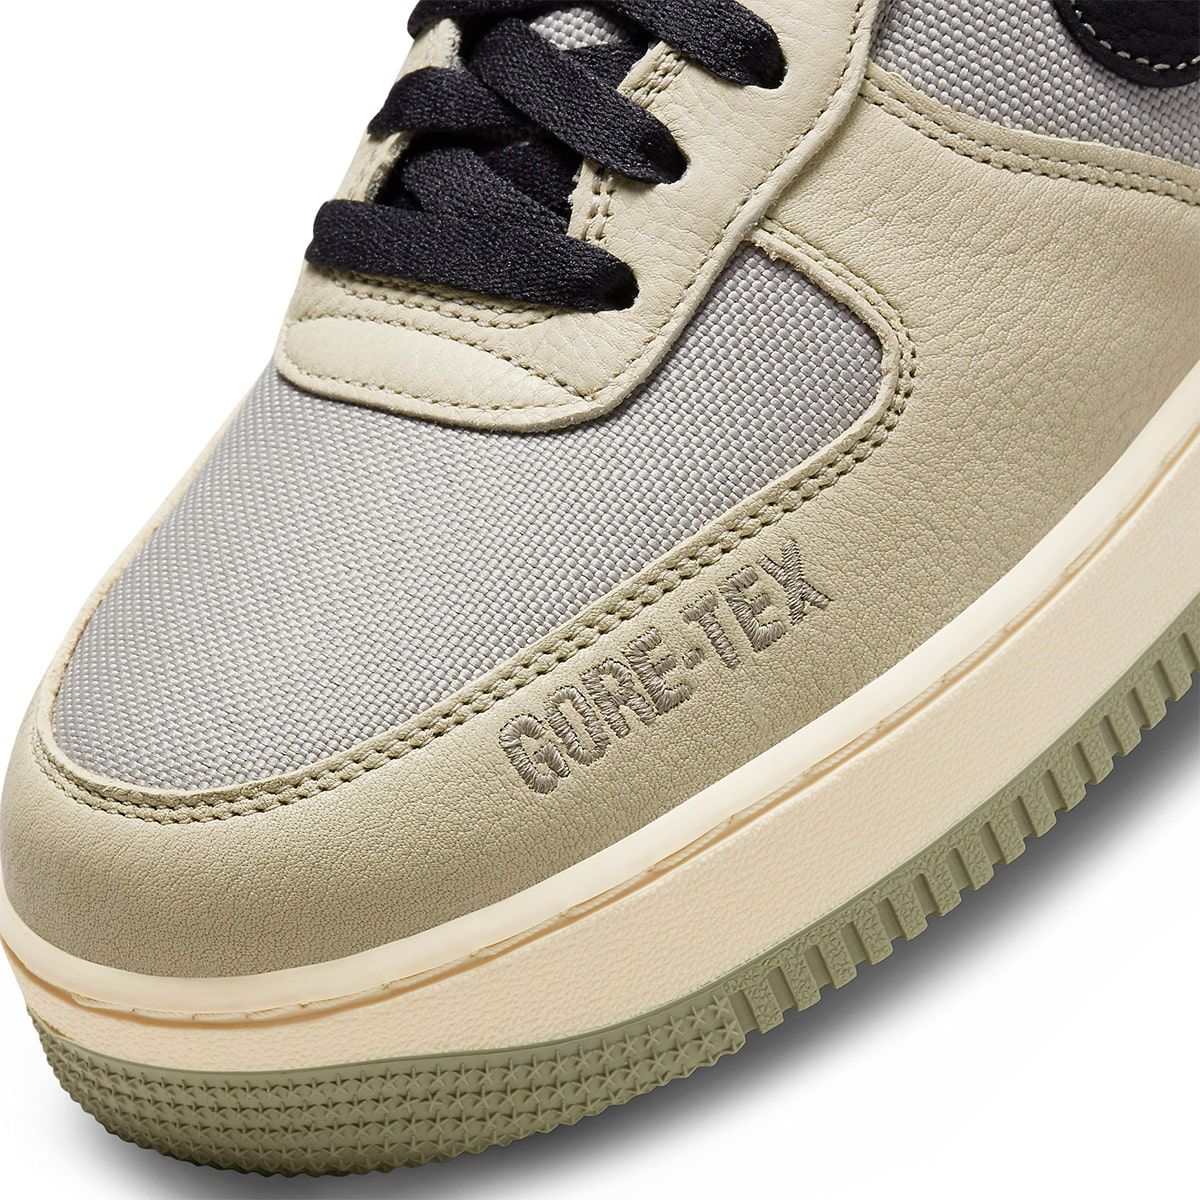 Nike Air Force 1 Low GORE-TEX Appears in Olive and Black | House of Heat°